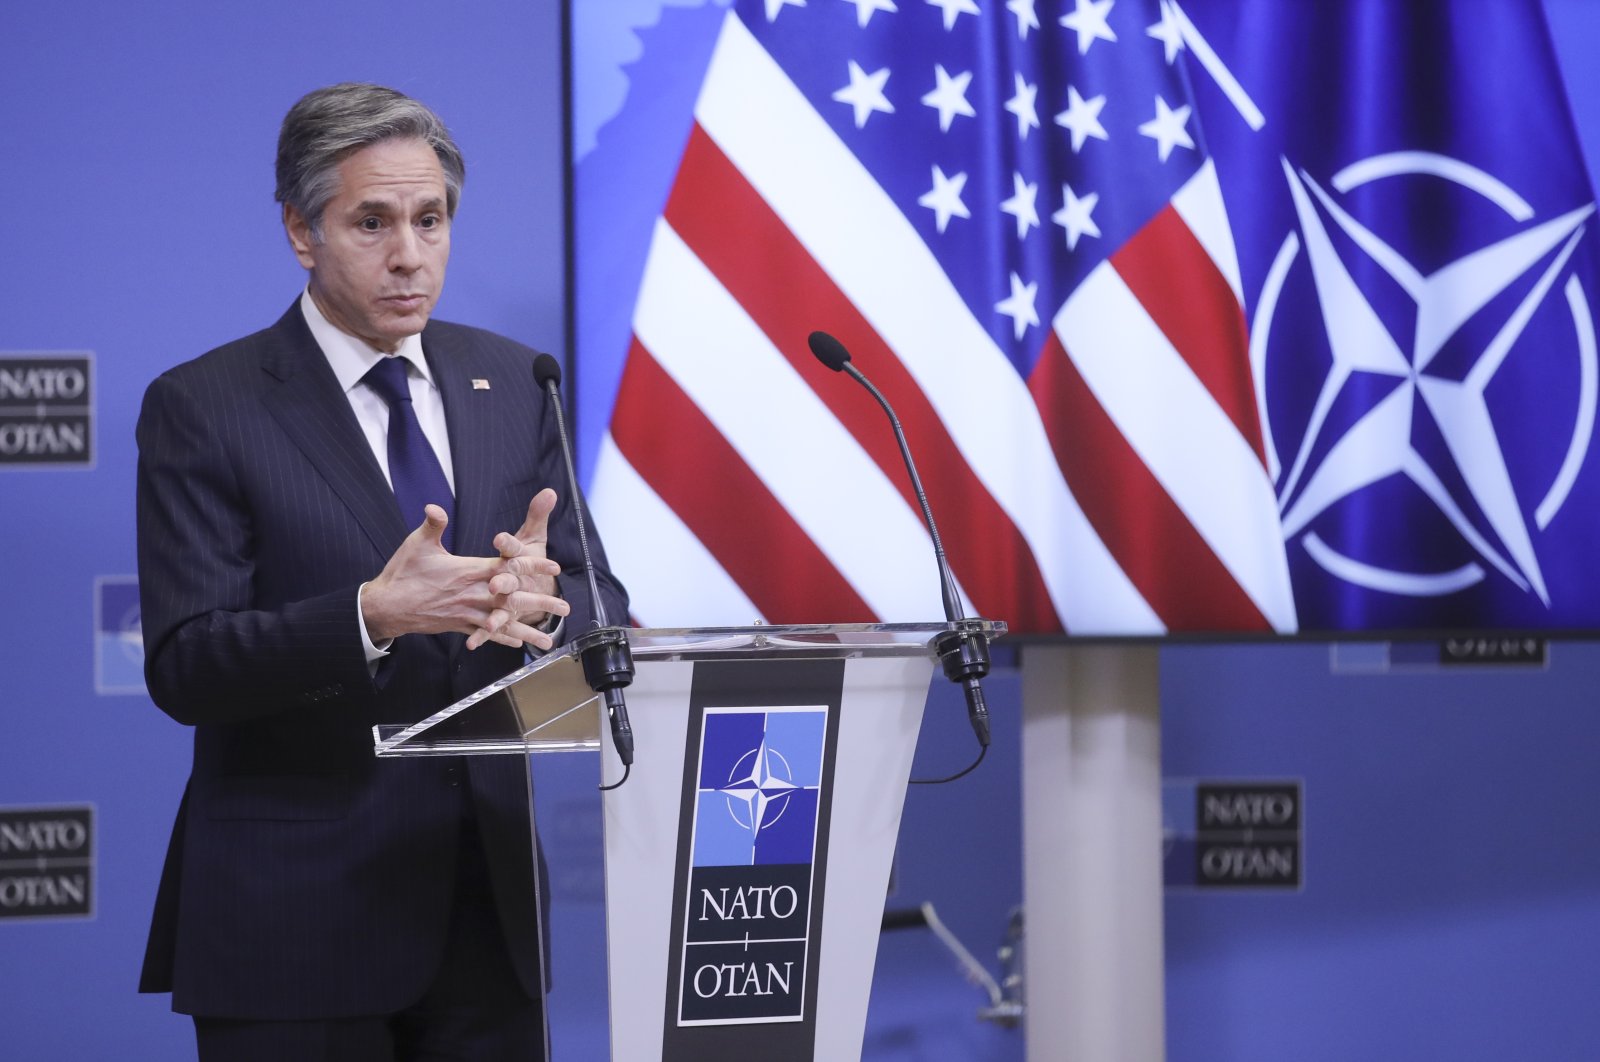 U.S. Secretary of State Antony Blinken speaks during a news conference at the end of a NATO Foreign Affairs Ministers meeting at NATO headquarters in Brussels, March 24, 2021. (AP Photo)